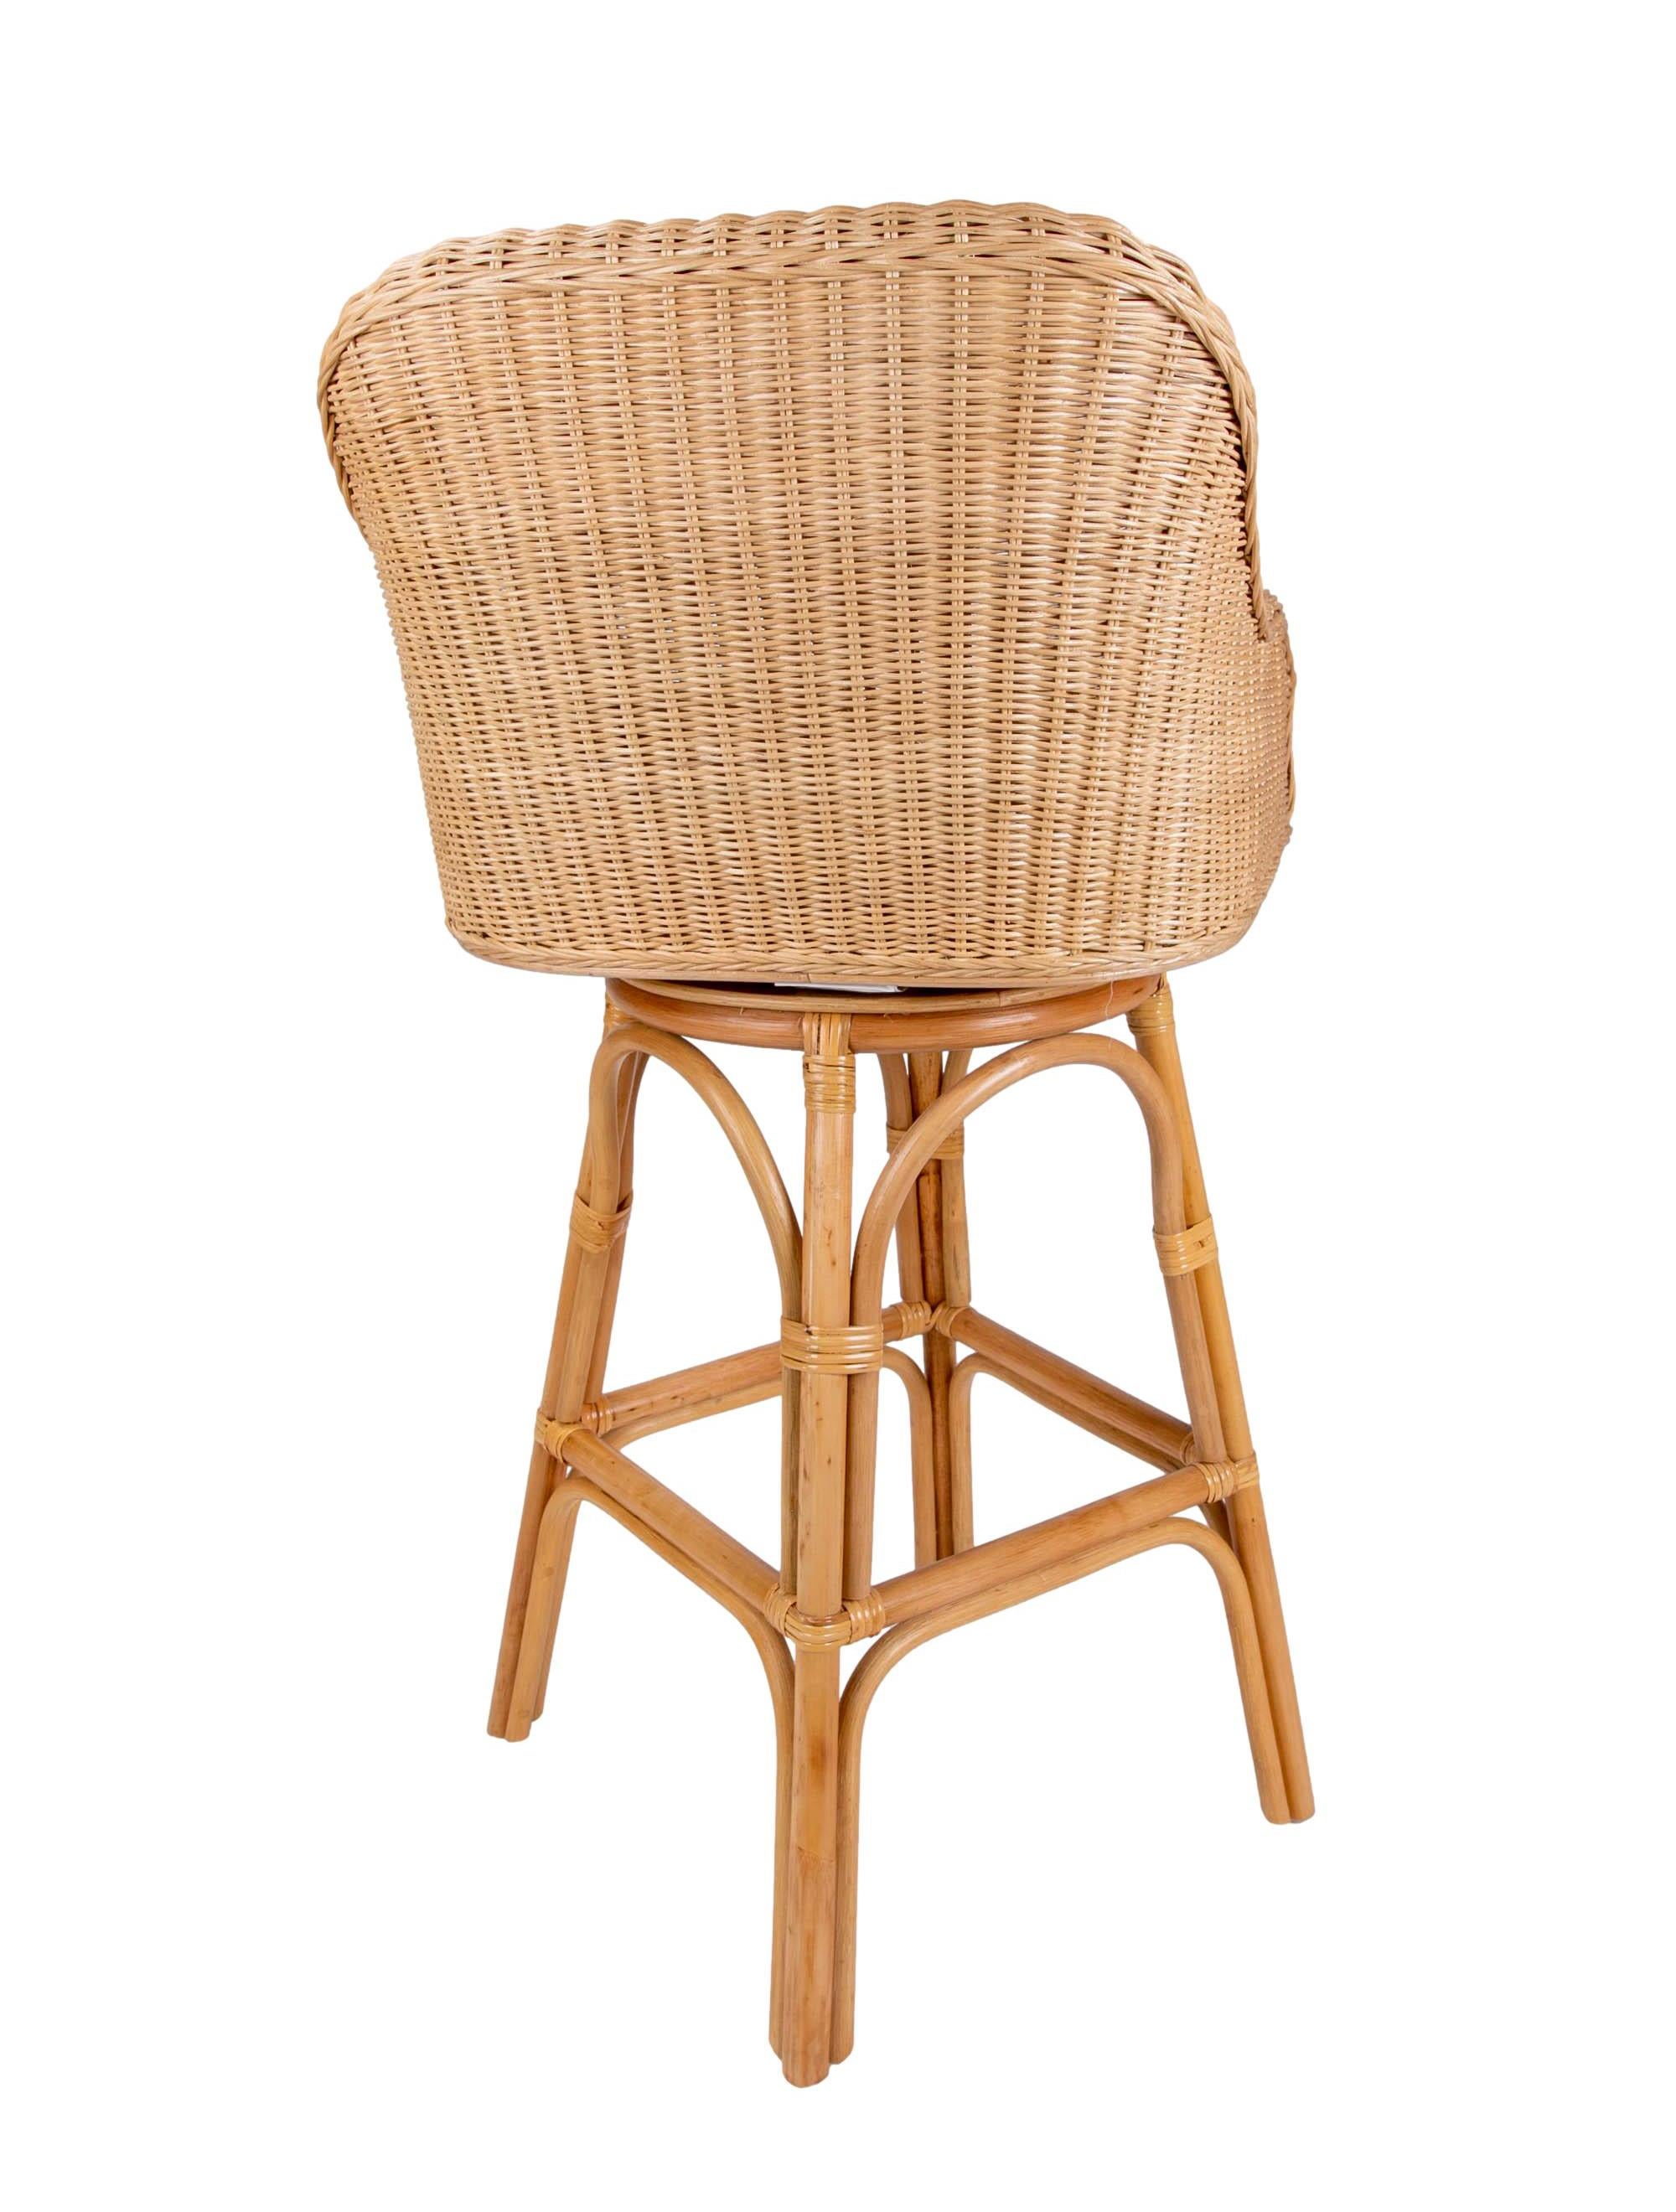 Upholstered Rattan and Wicker Bar stool with Sideways Movement 1